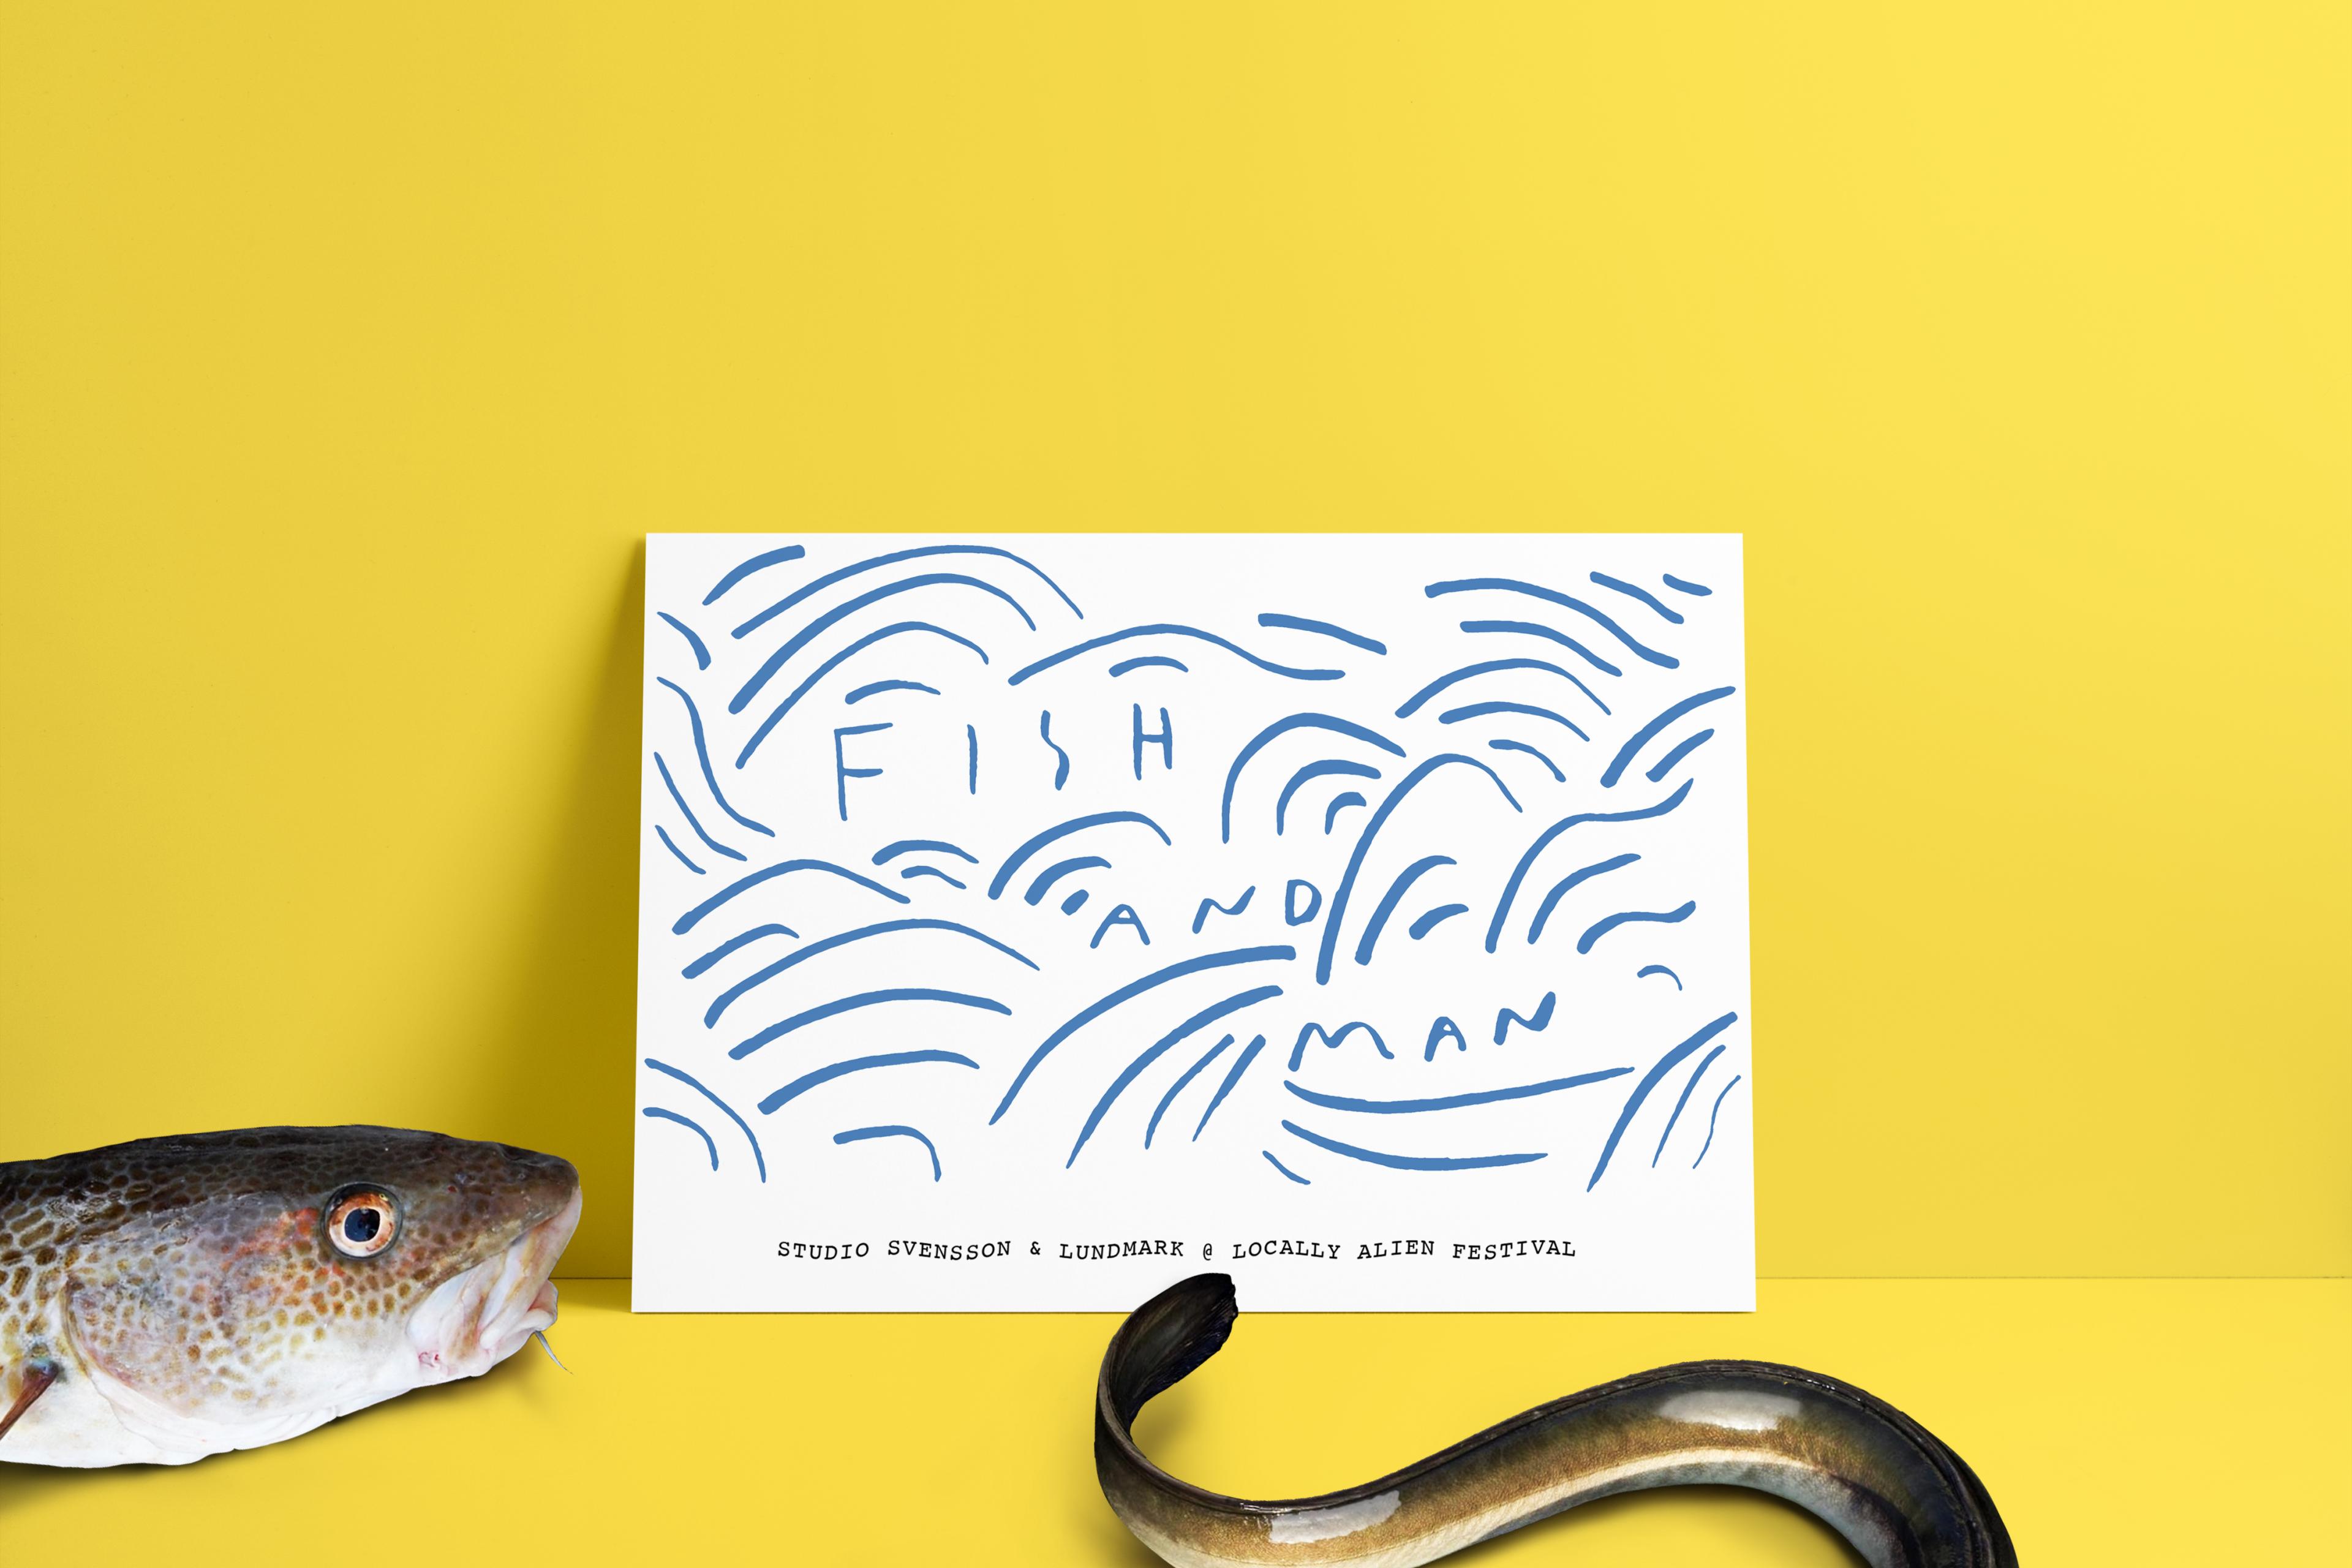 Eel on a yellow background, a card in the center reads “Fish and Man”